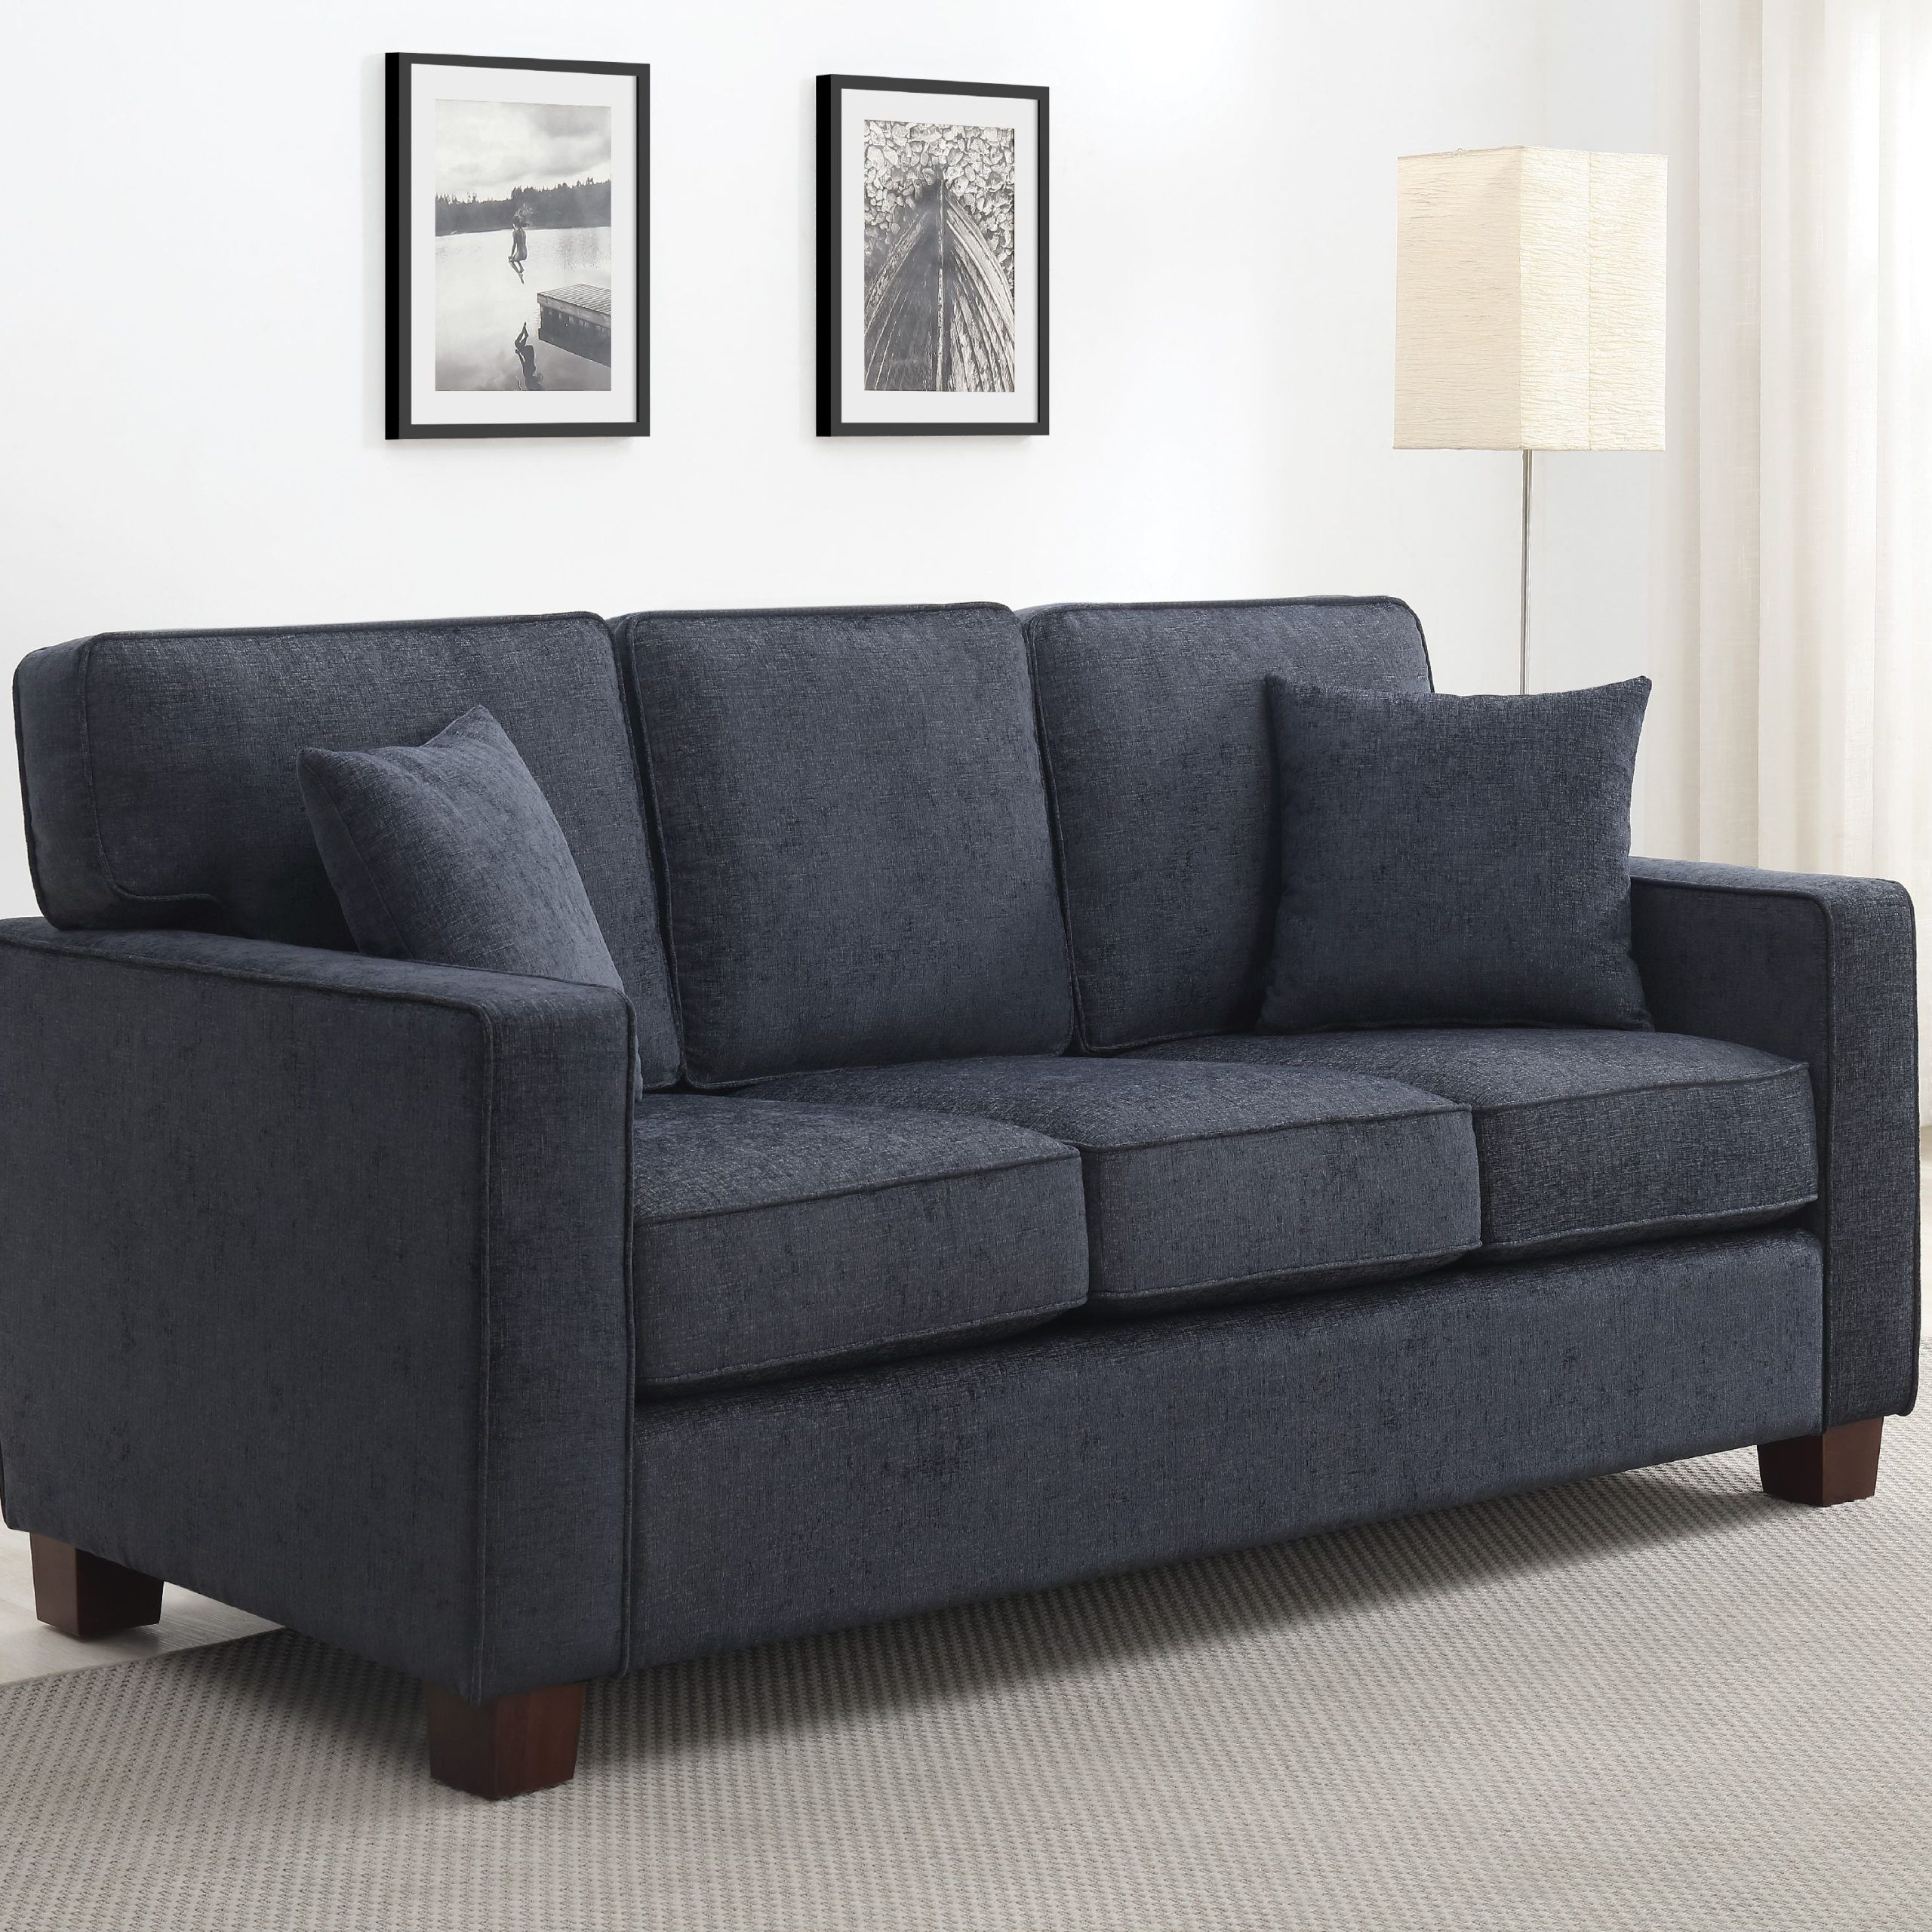 Osp Home Furnishings Russell 3 Seater Sofa In Navy Fabric 3/ctn Inside Navy Sleeper Sofa Couches (Gallery 13 of 20)